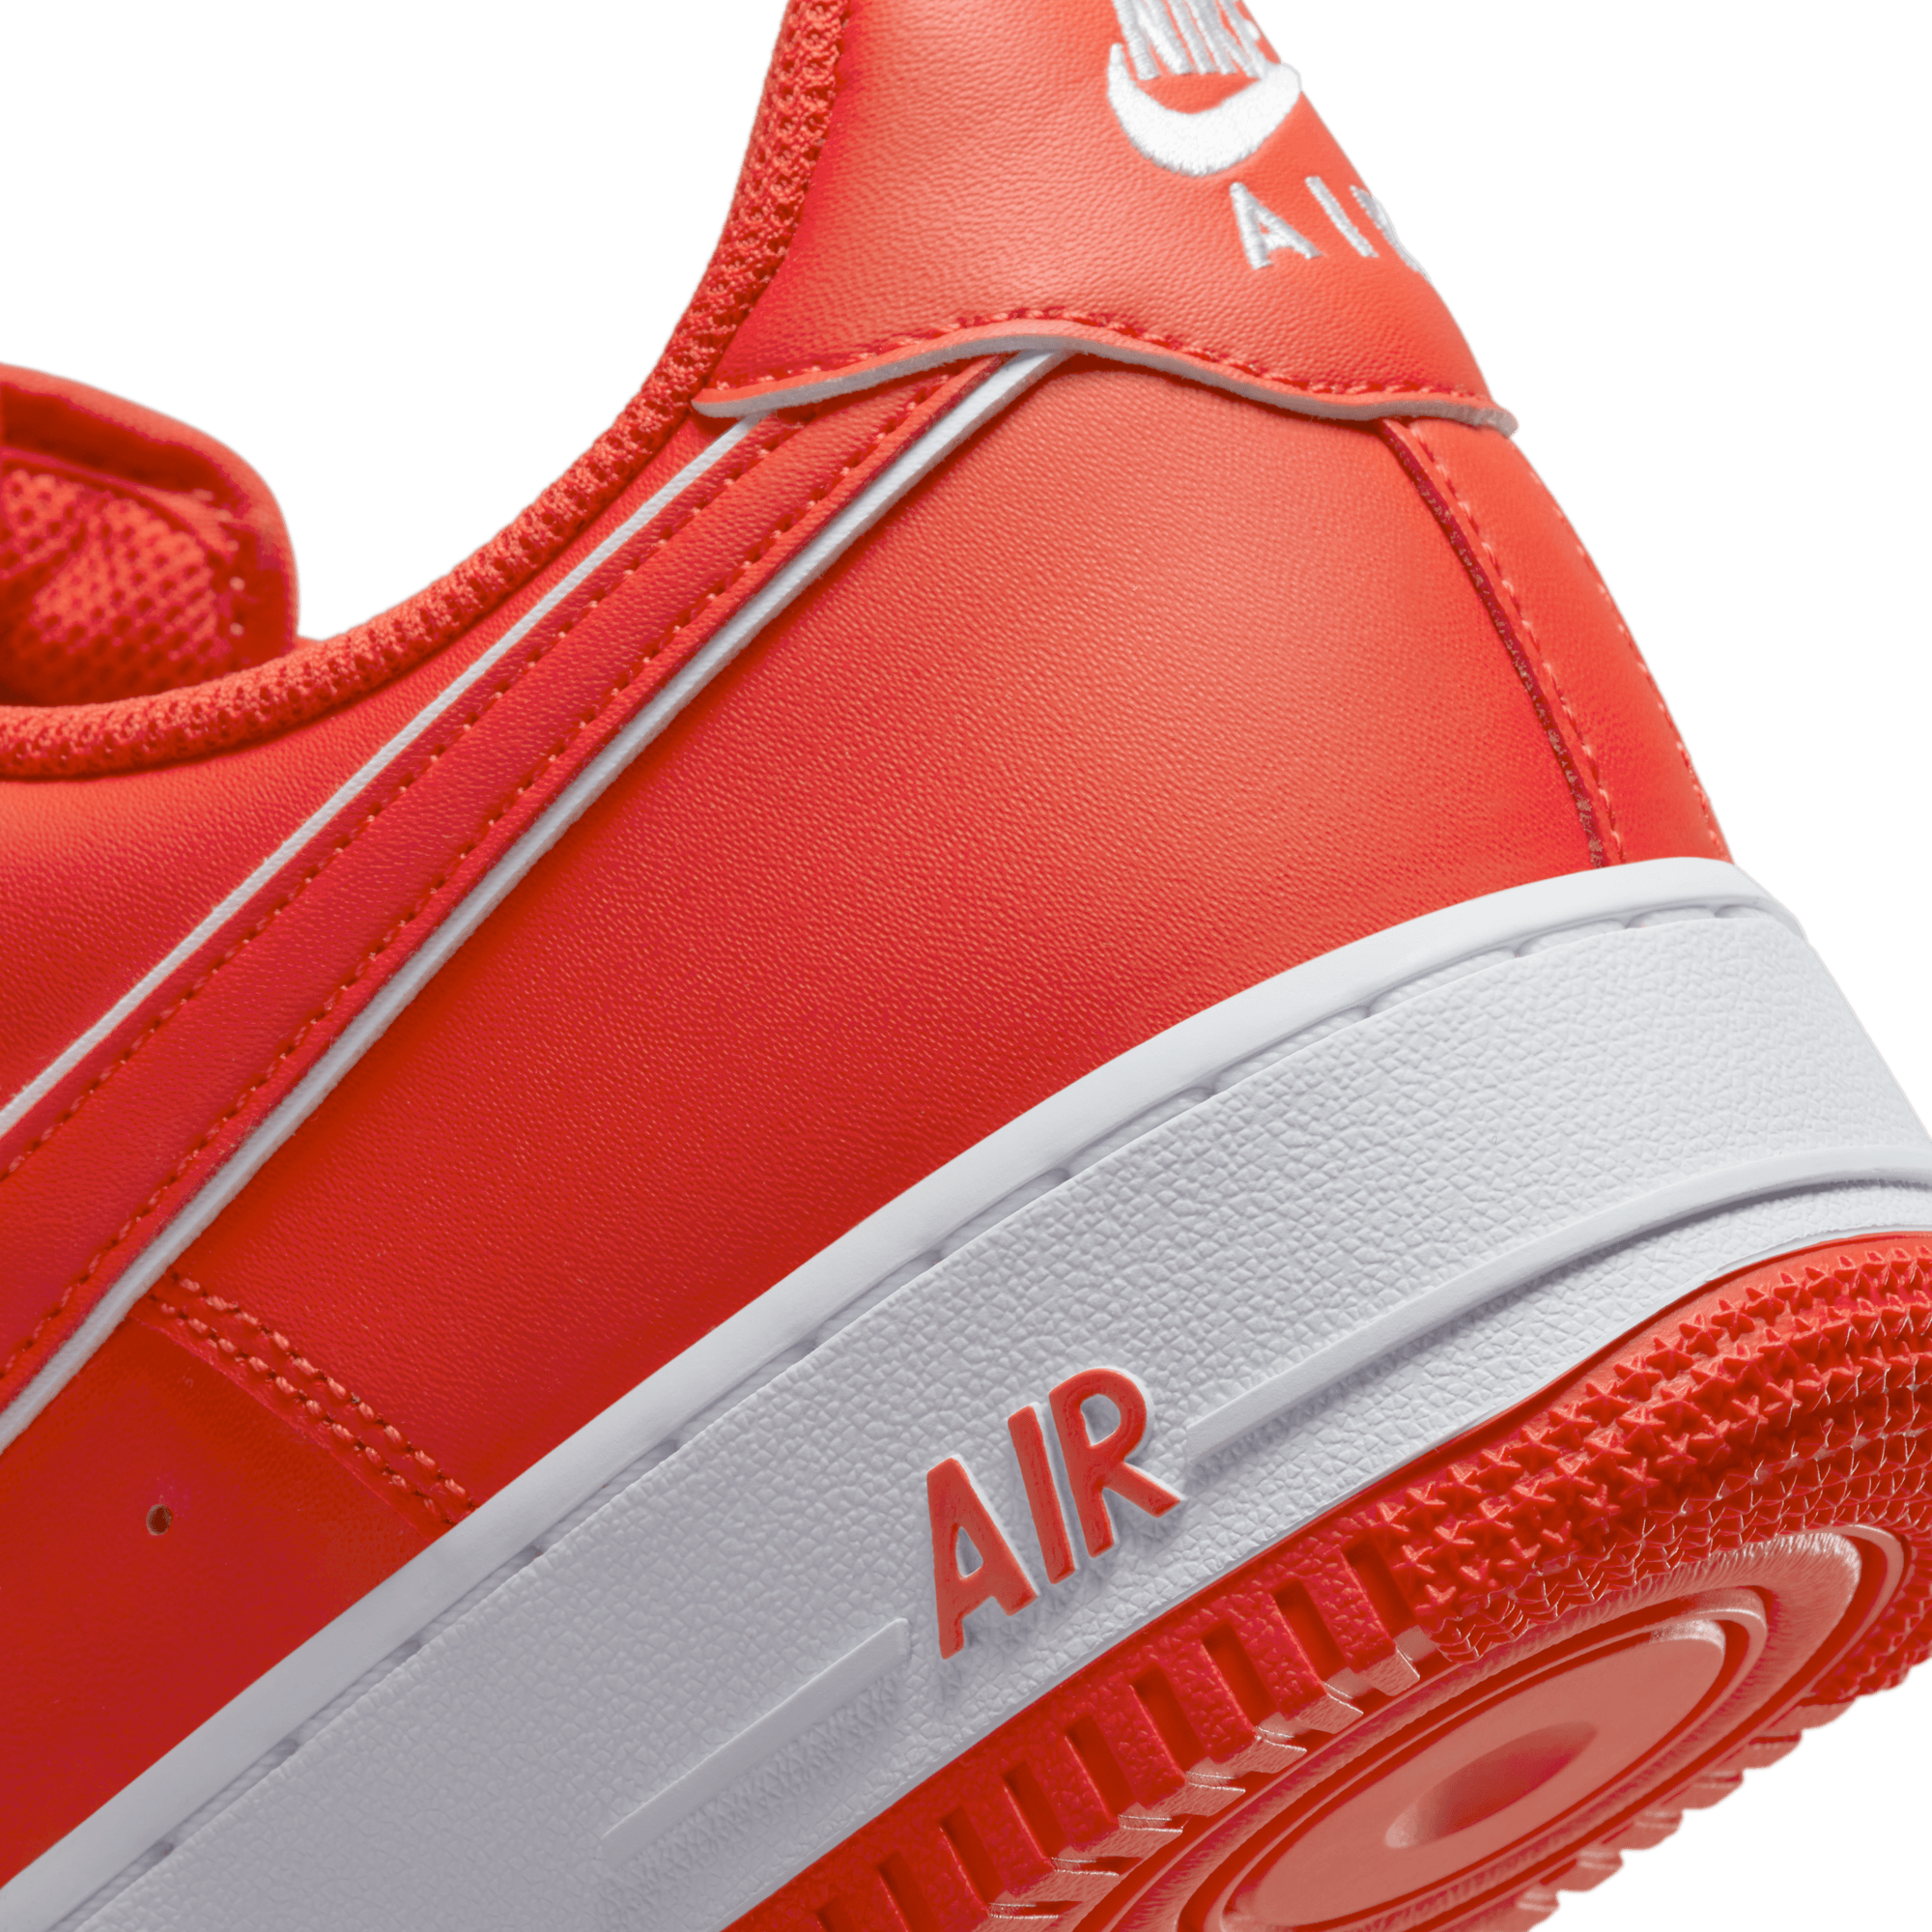 Nike Air Force 1 '07 Essential - Women's - GBNY